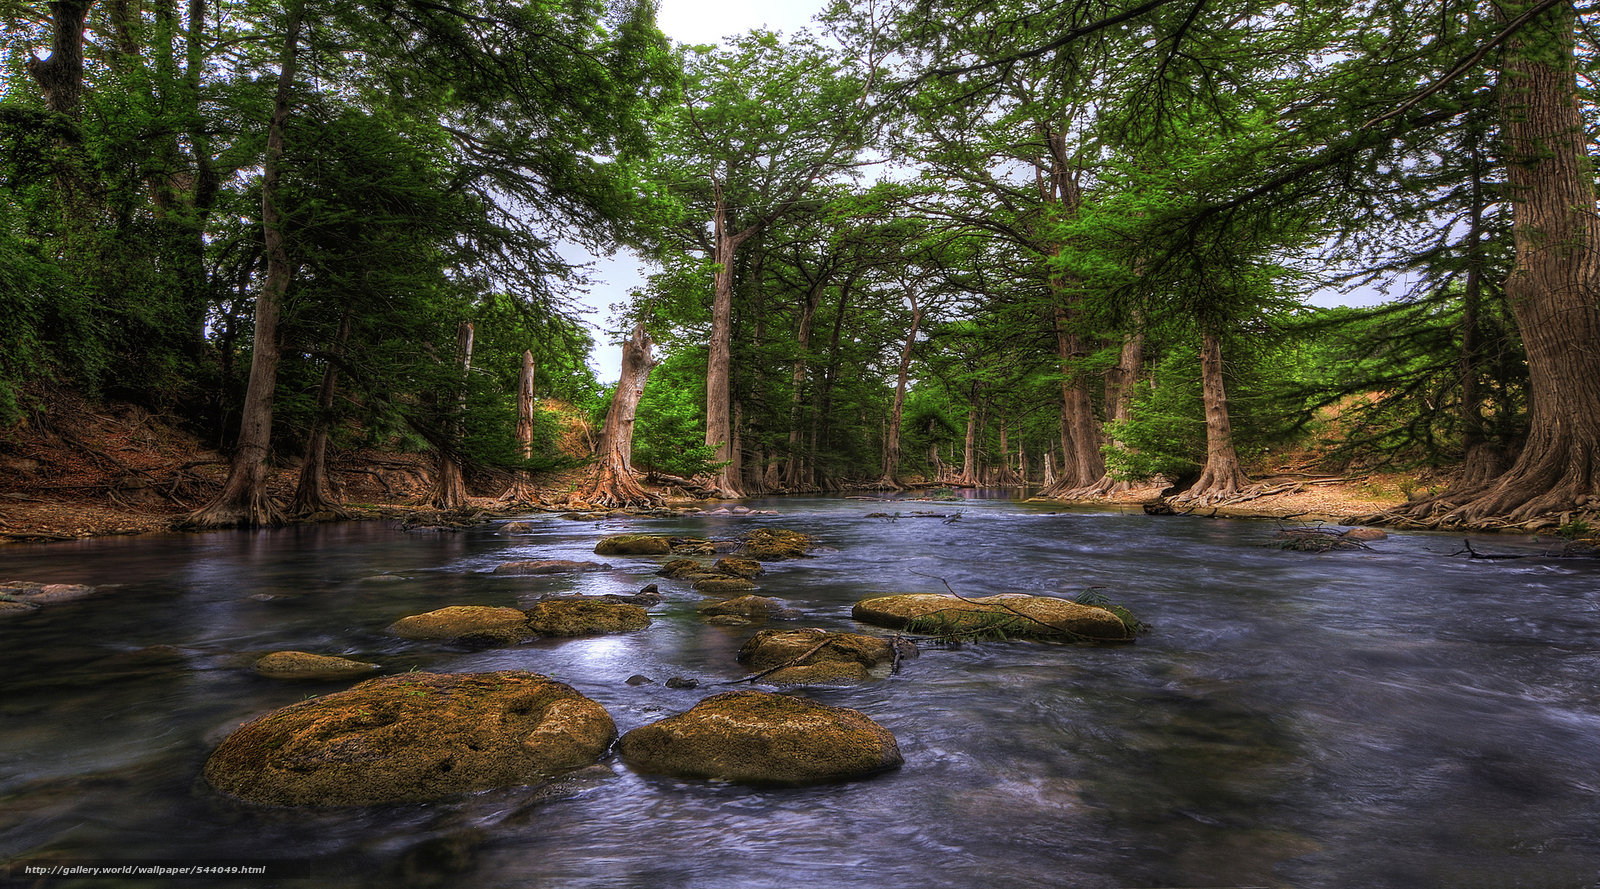 Download wallpaper Guadalupe River Hill Country texas USA free